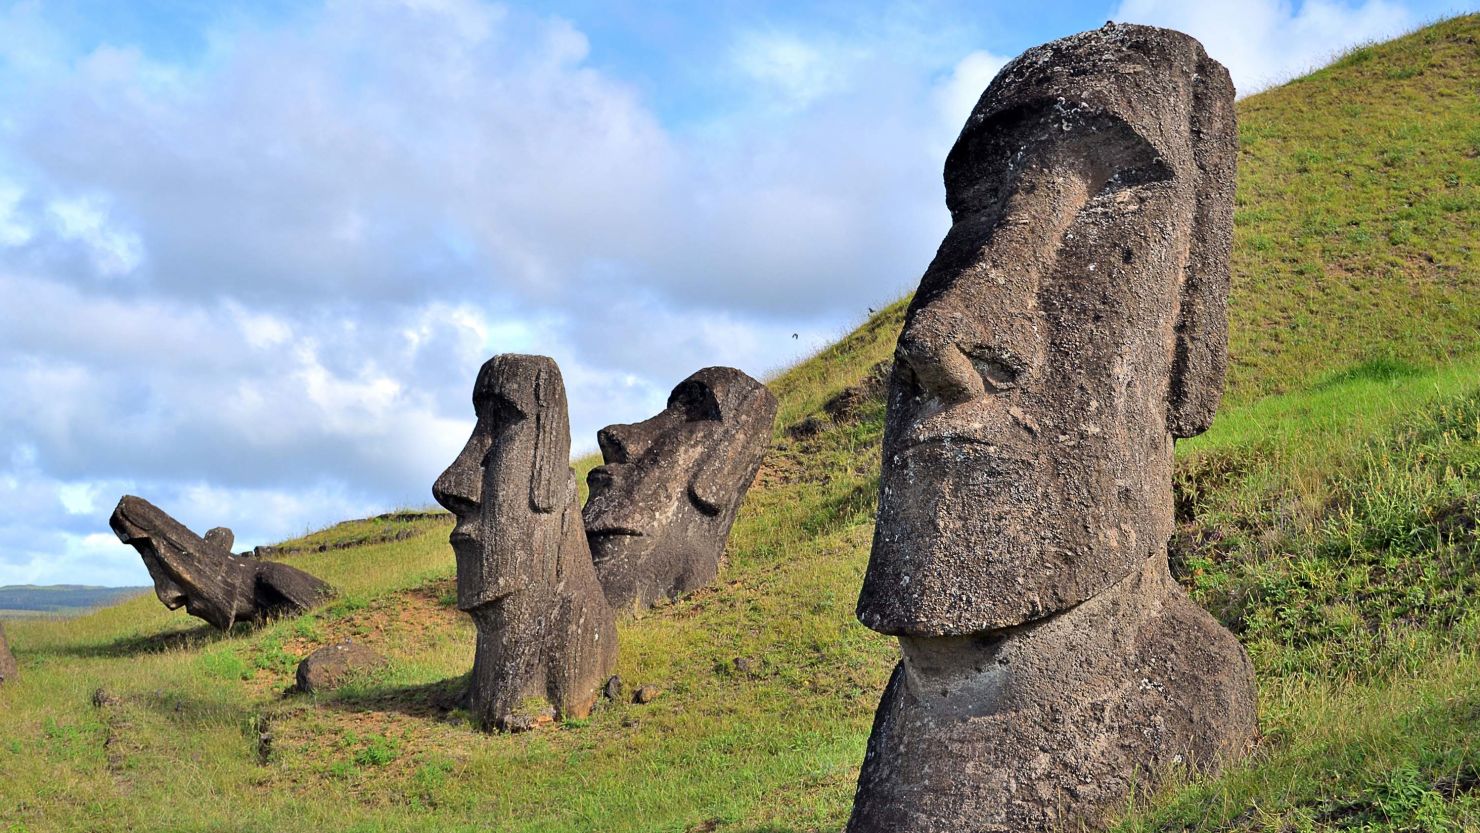 Researchers say Easter Island's statues were situated near sources of fresh water.